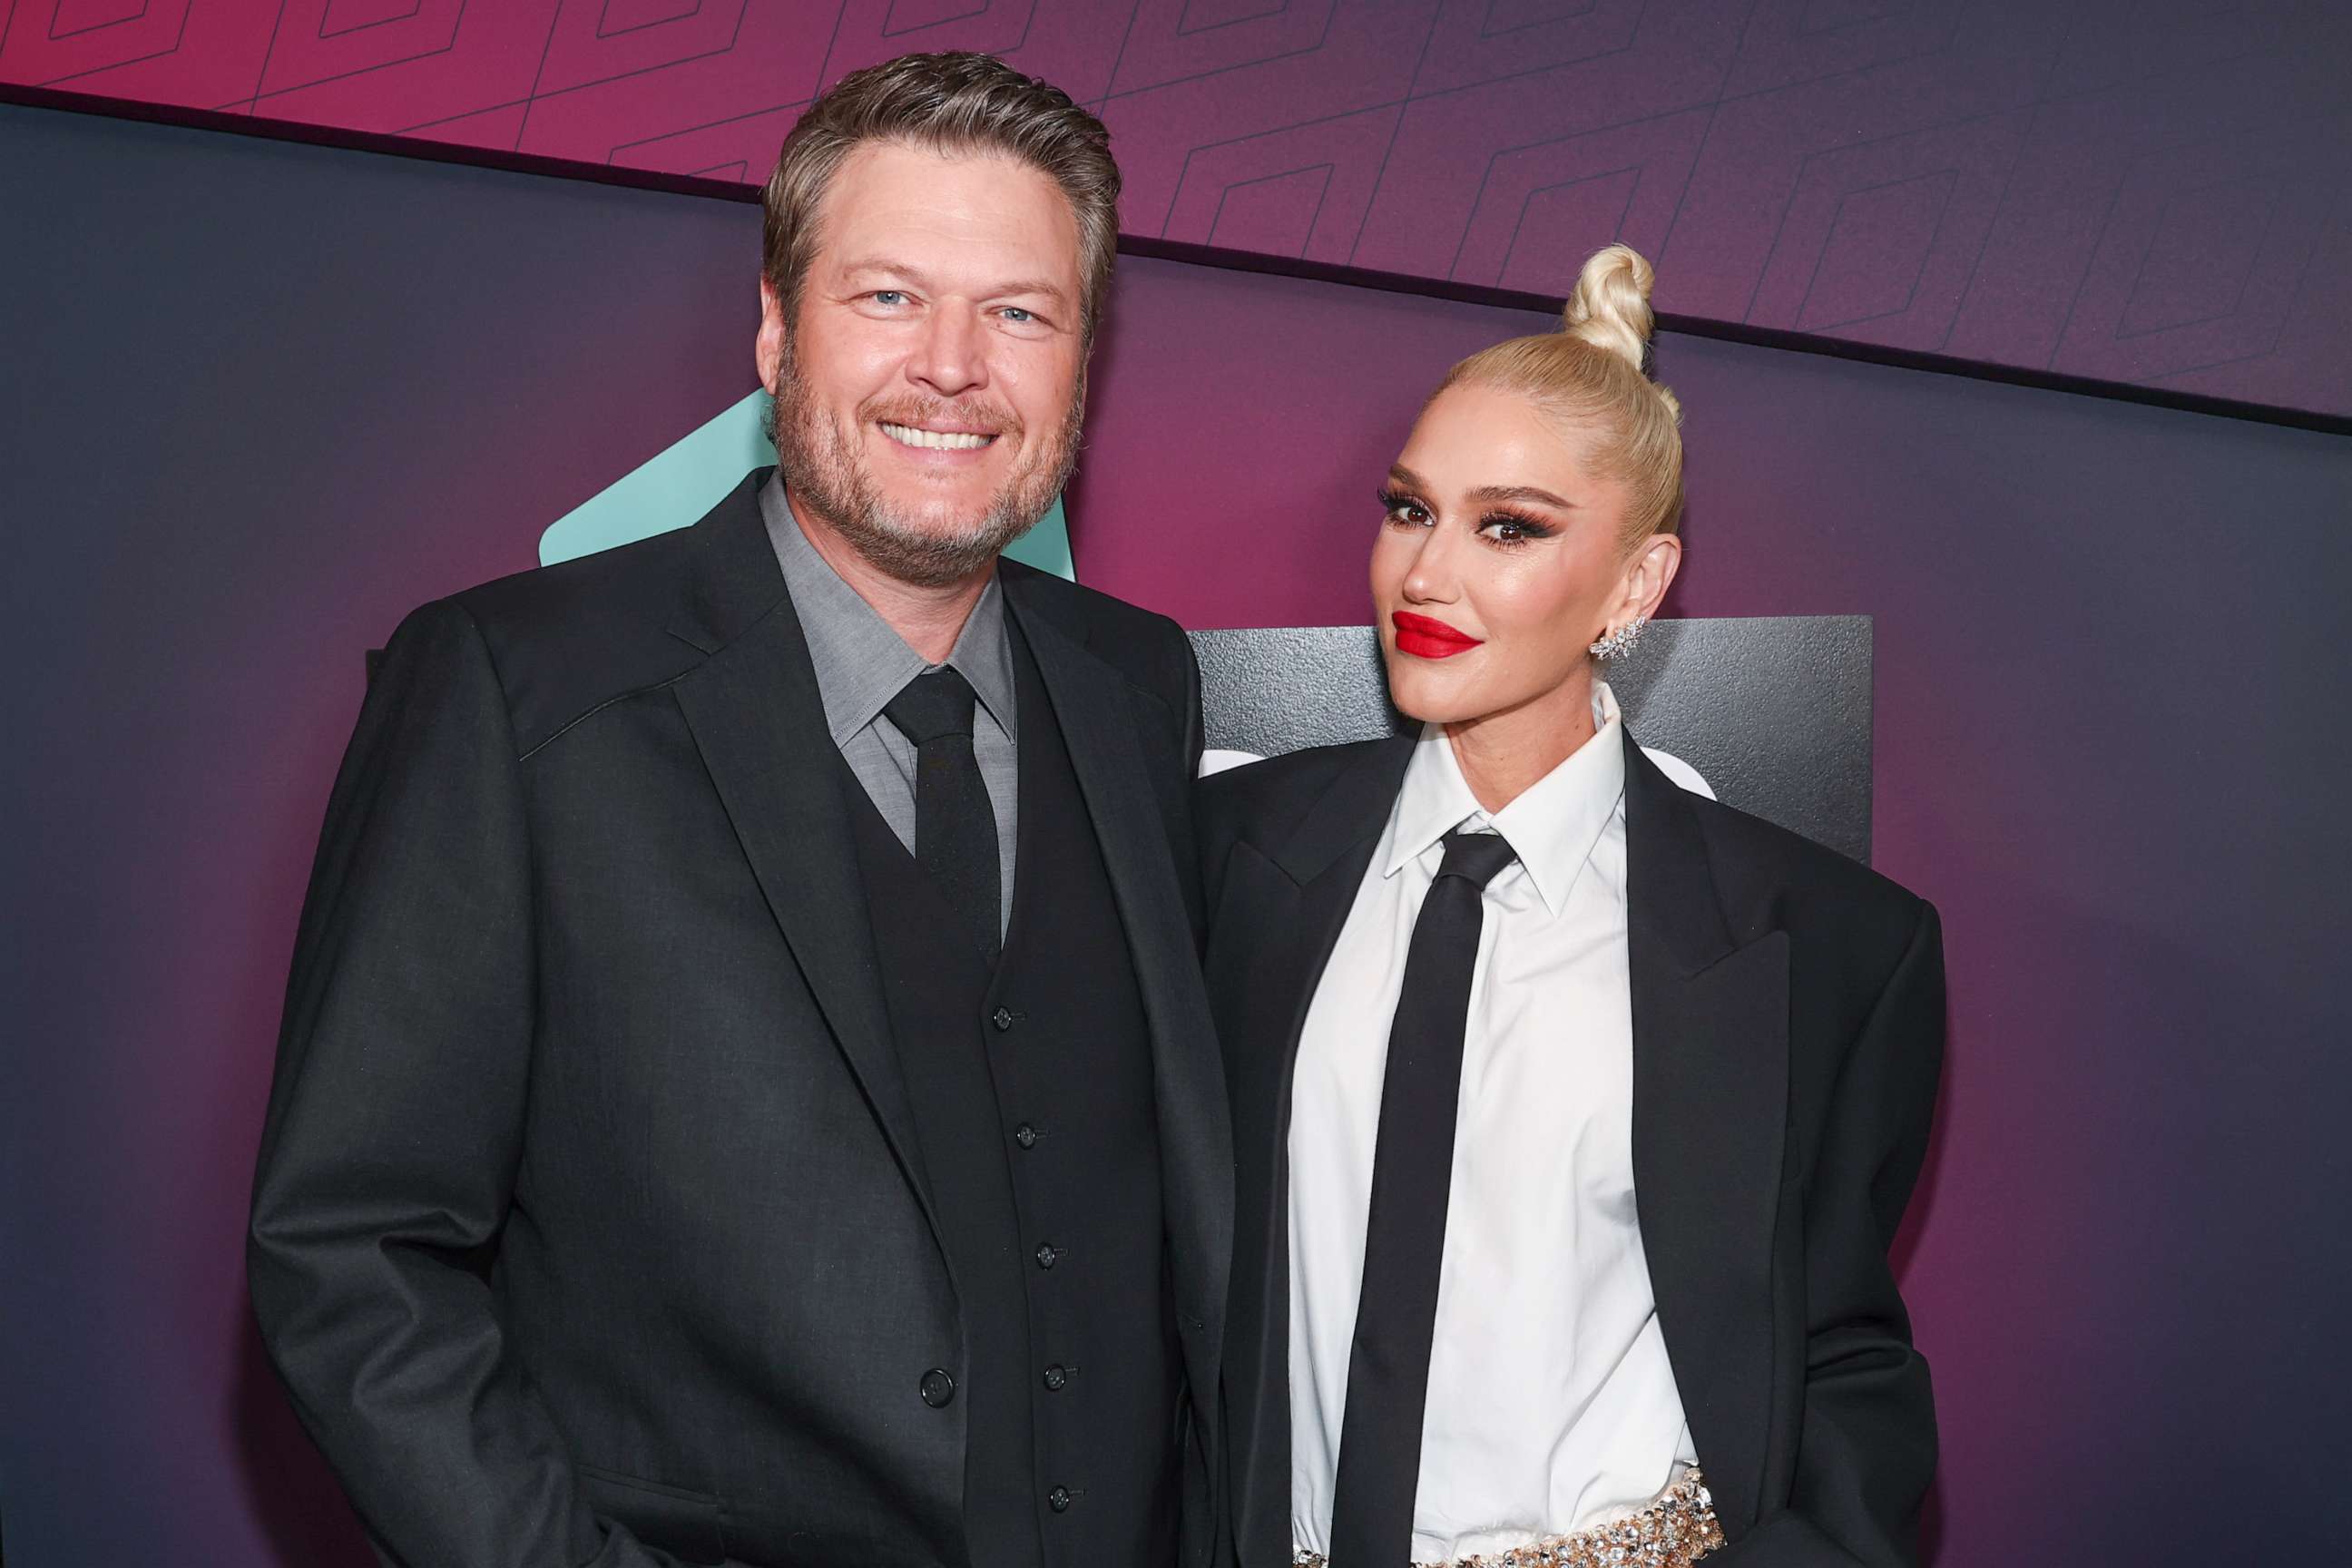 PHOTO: Blake Shelton and Gwen Stefani at the 2023 CMT Music Awards held at Moody Center, April 2, 2023, in Austin, Texas.